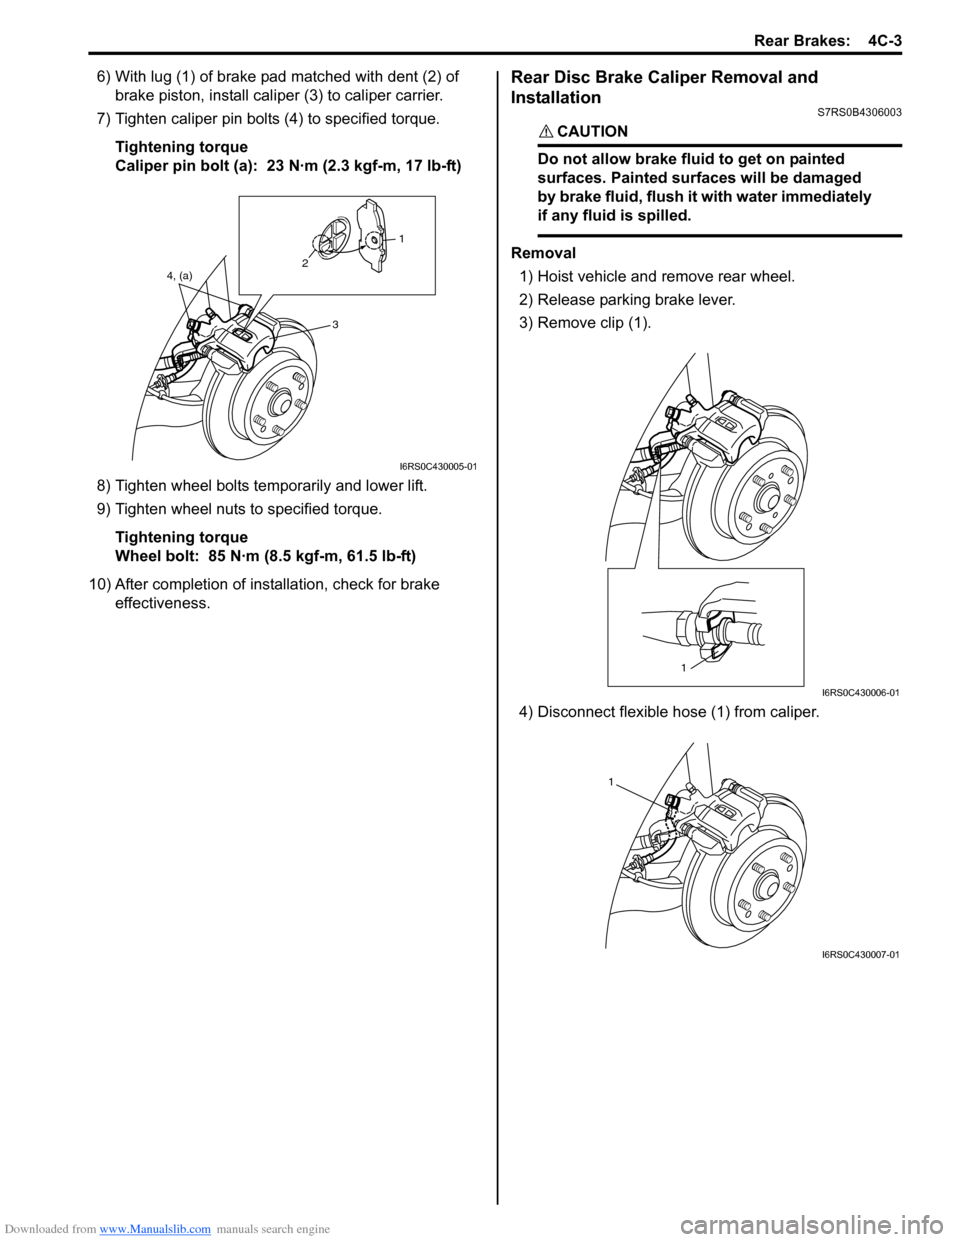 SUZUKI SWIFT 2006 2.G Service Owners Guide Downloaded from www.Manualslib.com manuals search engine Rear Brakes:  4C-3
6) With lug (1) of brake pad matched with dent (2) of brake piston, install caliper  (3) to caliper carrier.
7) Tighten cali